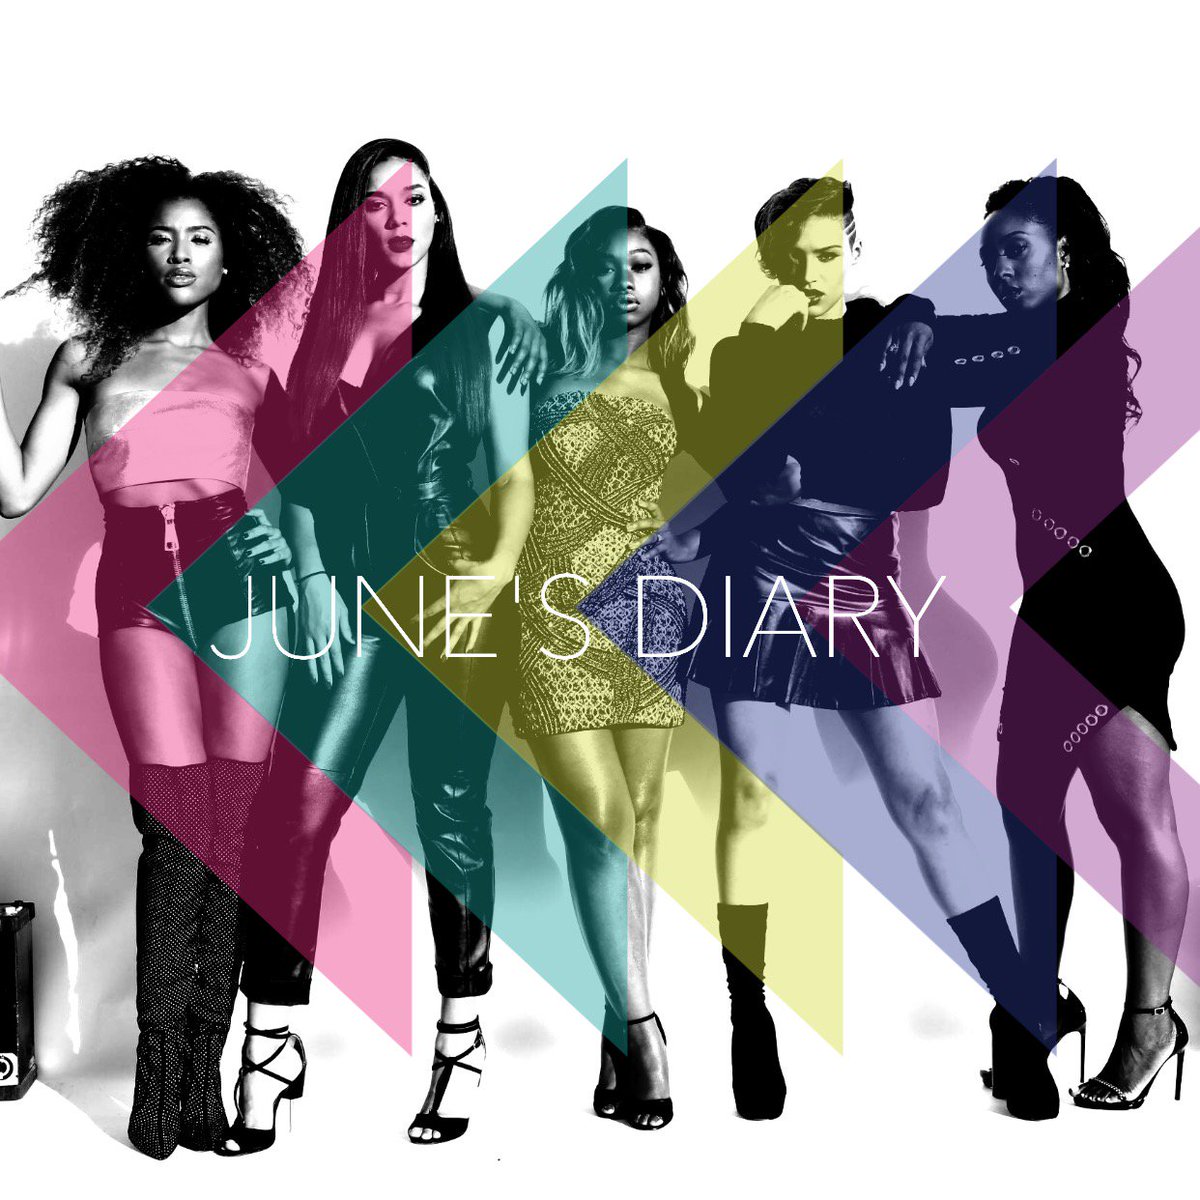 RT @ThisIsRnB: #Listen: @junesdiary Premiere Sexy New Song “I Know Why You Calling” https://t.co/Wt58IqC9BJ ???? ???? ???? https://t.co/sLMEAZVUTf